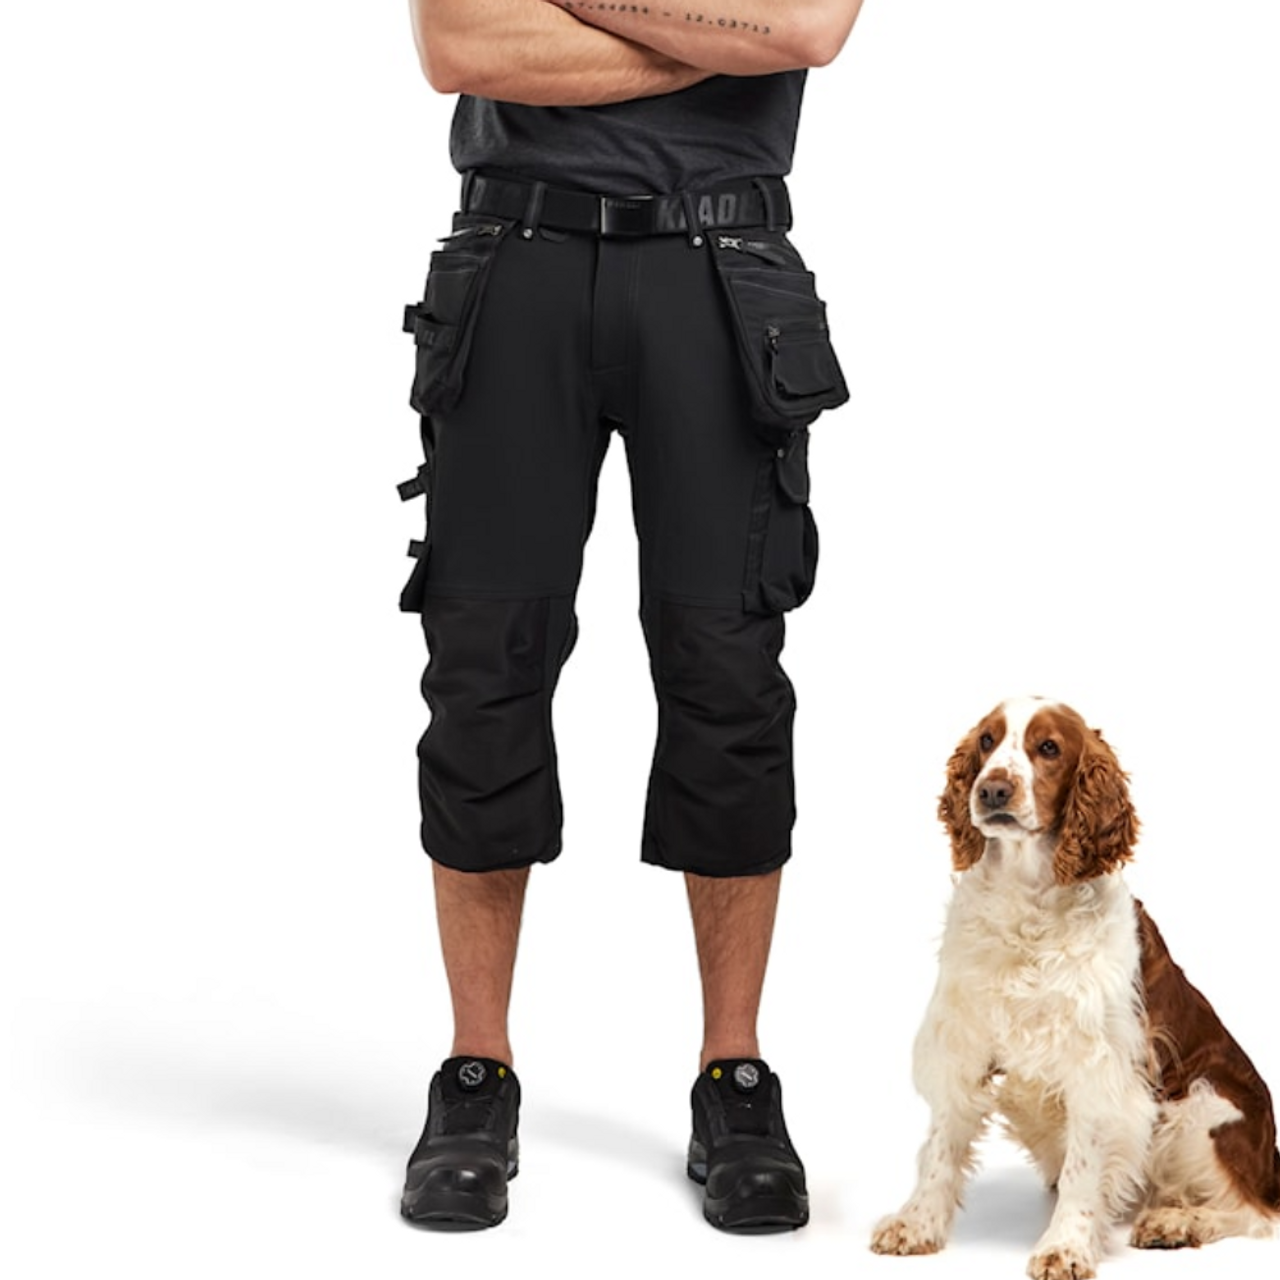 BLAKLADER 4-Way Stretch Black Shorts for Carpenters that have Kneepad Pockets  available in Australia and New Zealand